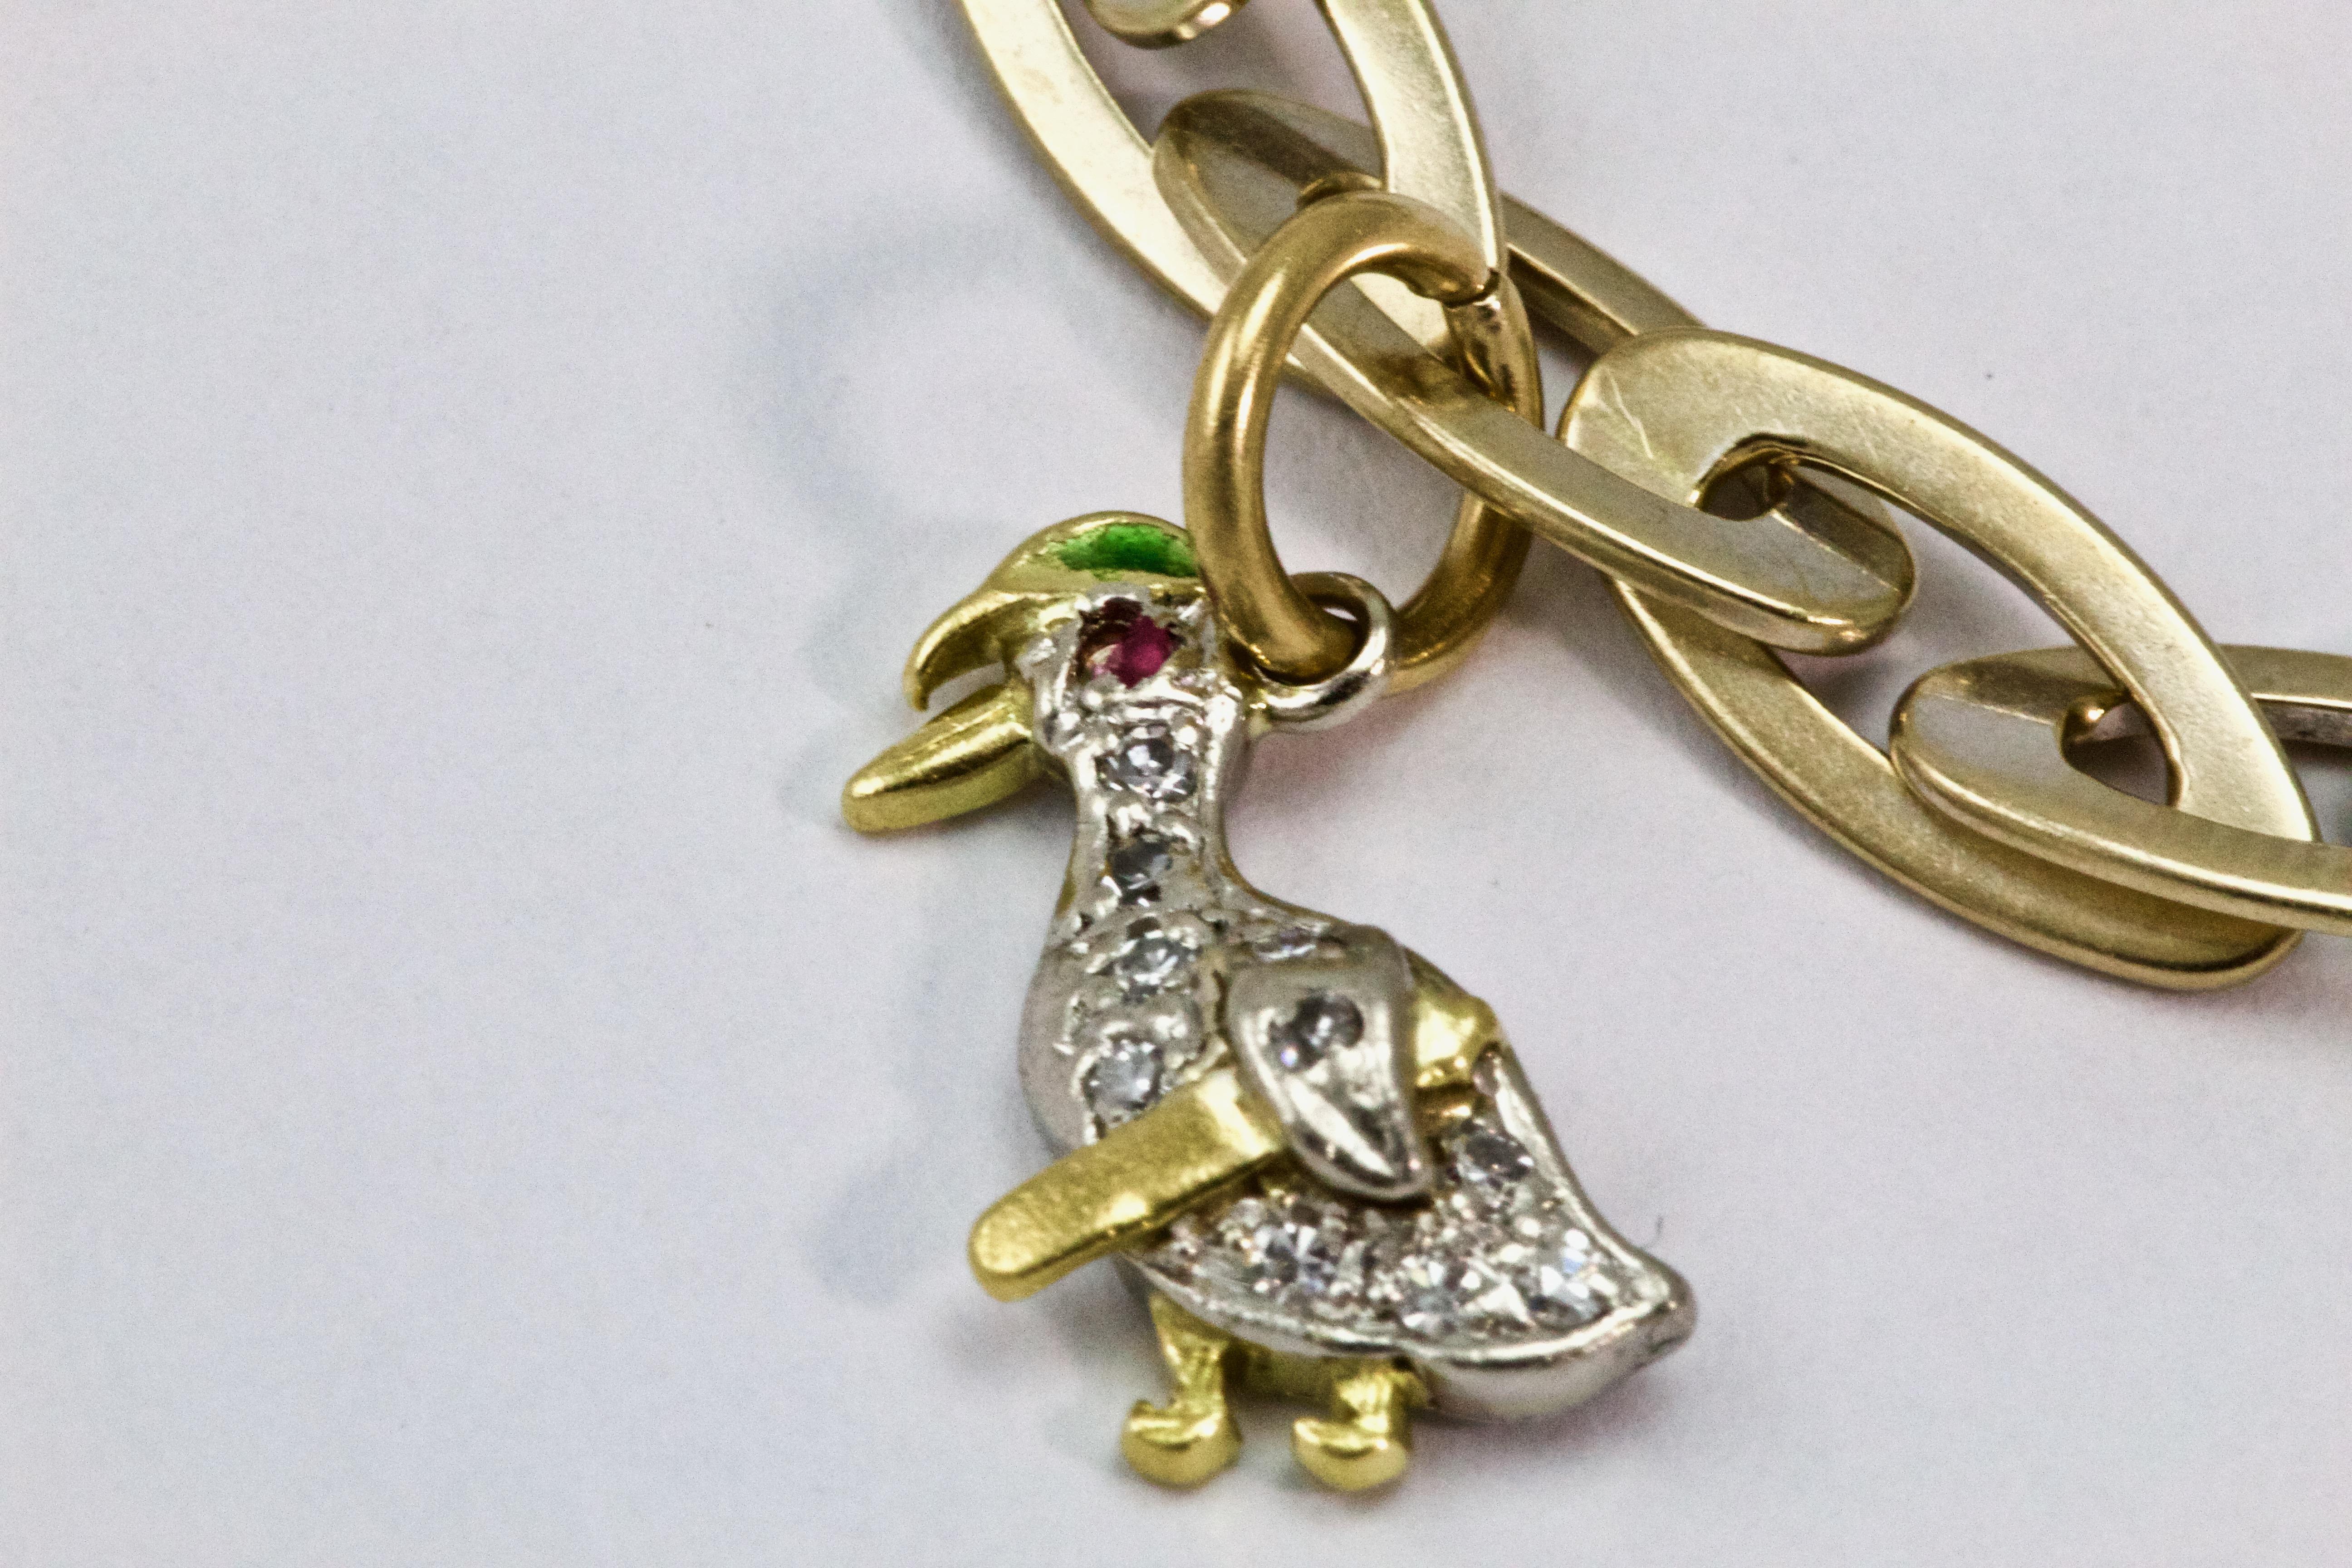 An absolutely stunning 18k gold bracelet with 3 Diamond charms. Firstly a duck with pave set diamonds throughout and a ruby accented eye, followed by a pave set diamond heart and finally a three dimensional white enamel rose with a central rose cut